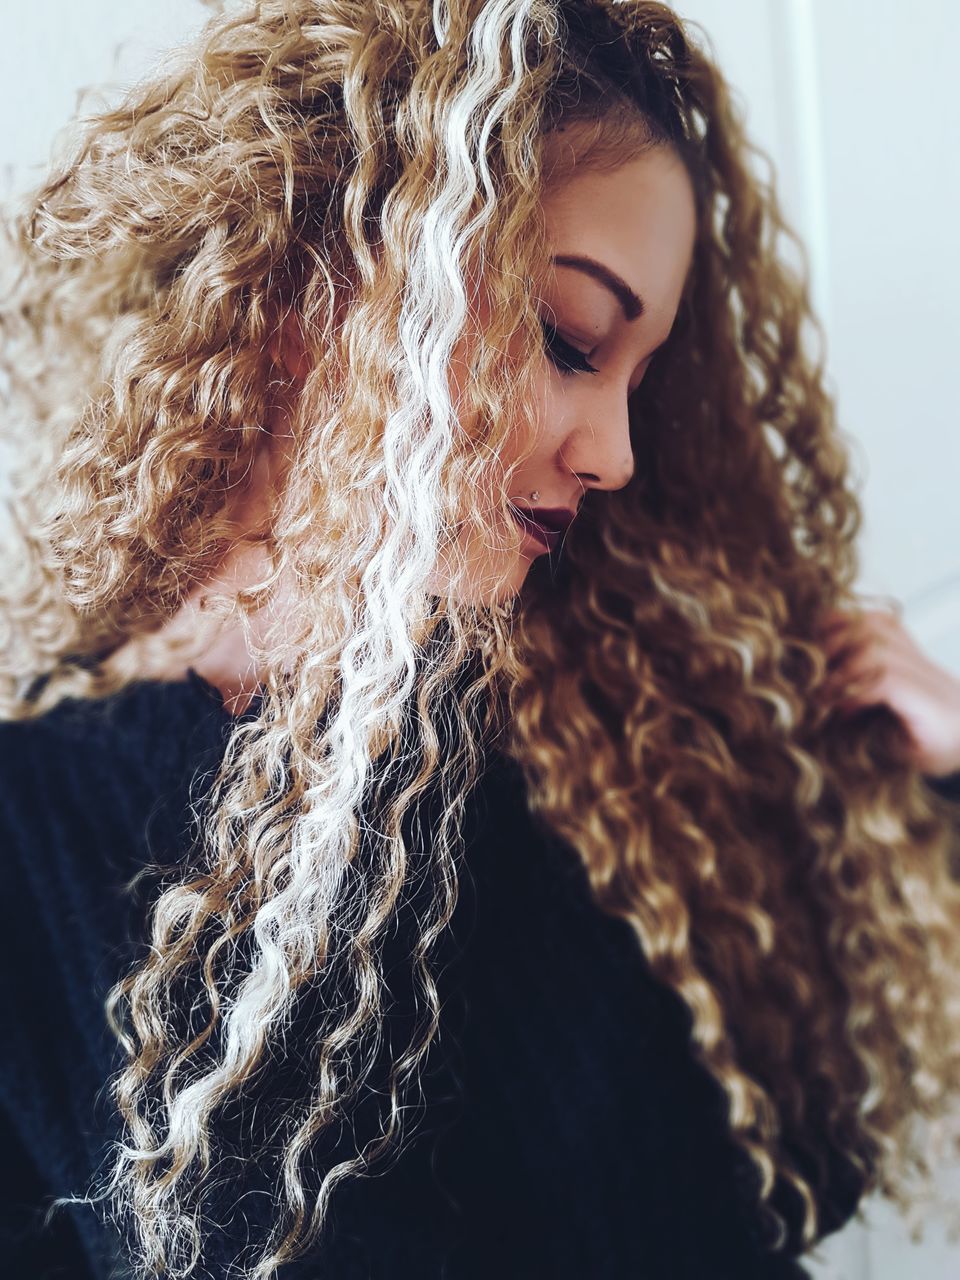 curly hair, long hair, young women, one person, young adult, real people, focus on foreground, beautiful woman, fashion, close-up, indoors, day